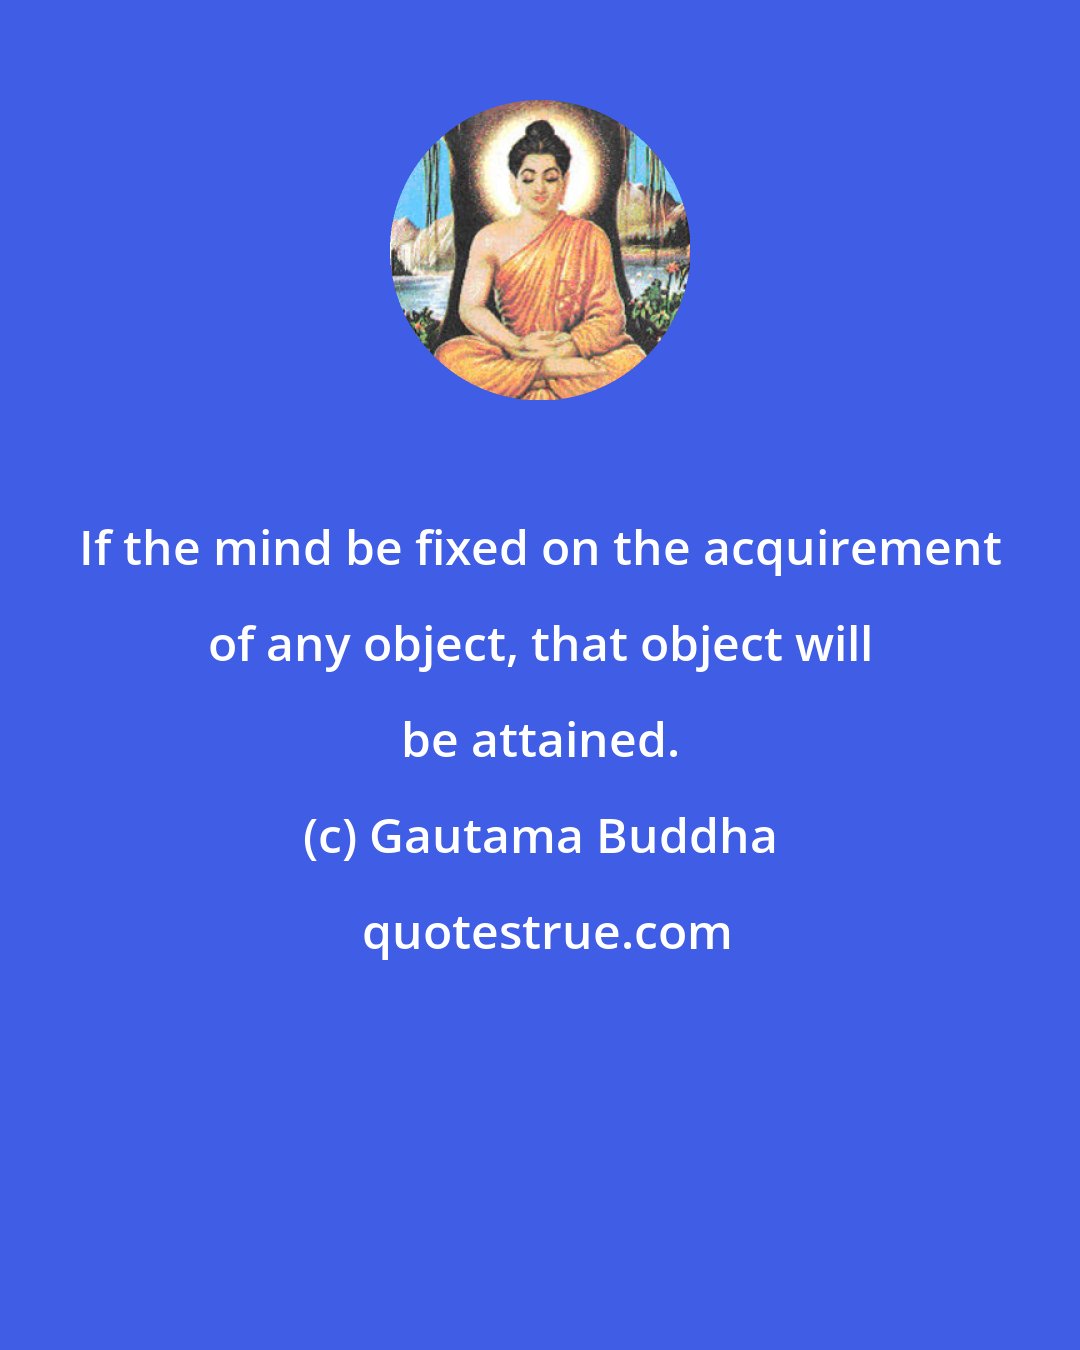 Gautama Buddha: If the mind be fixed on the acquirement of any object, that object will be attained.